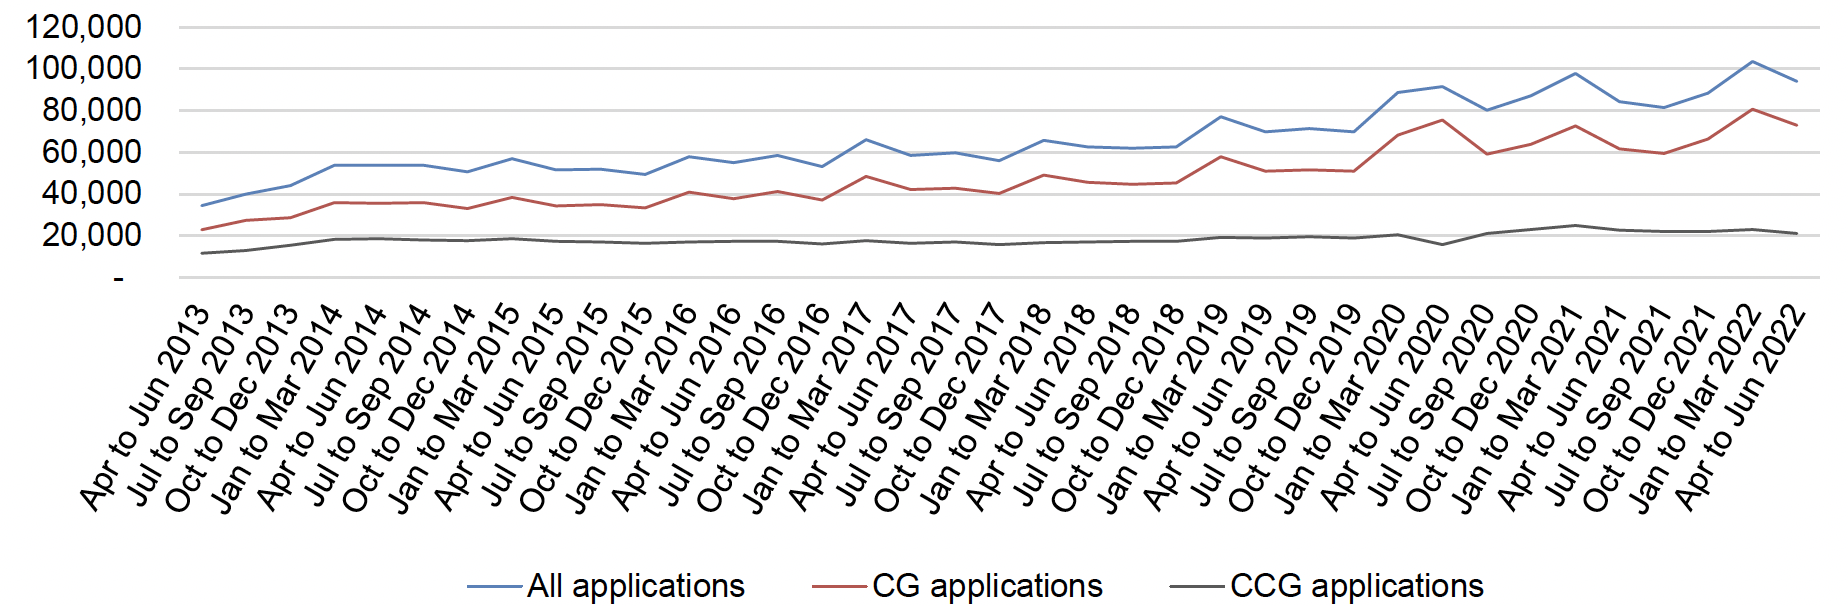 This figure shows trends from 2013 to 2022 in quarterly numbers of applications for Crisis Grants, Community Care Grants, and total applications to the SWF. The main patterns are described in the report text above and below the figure.